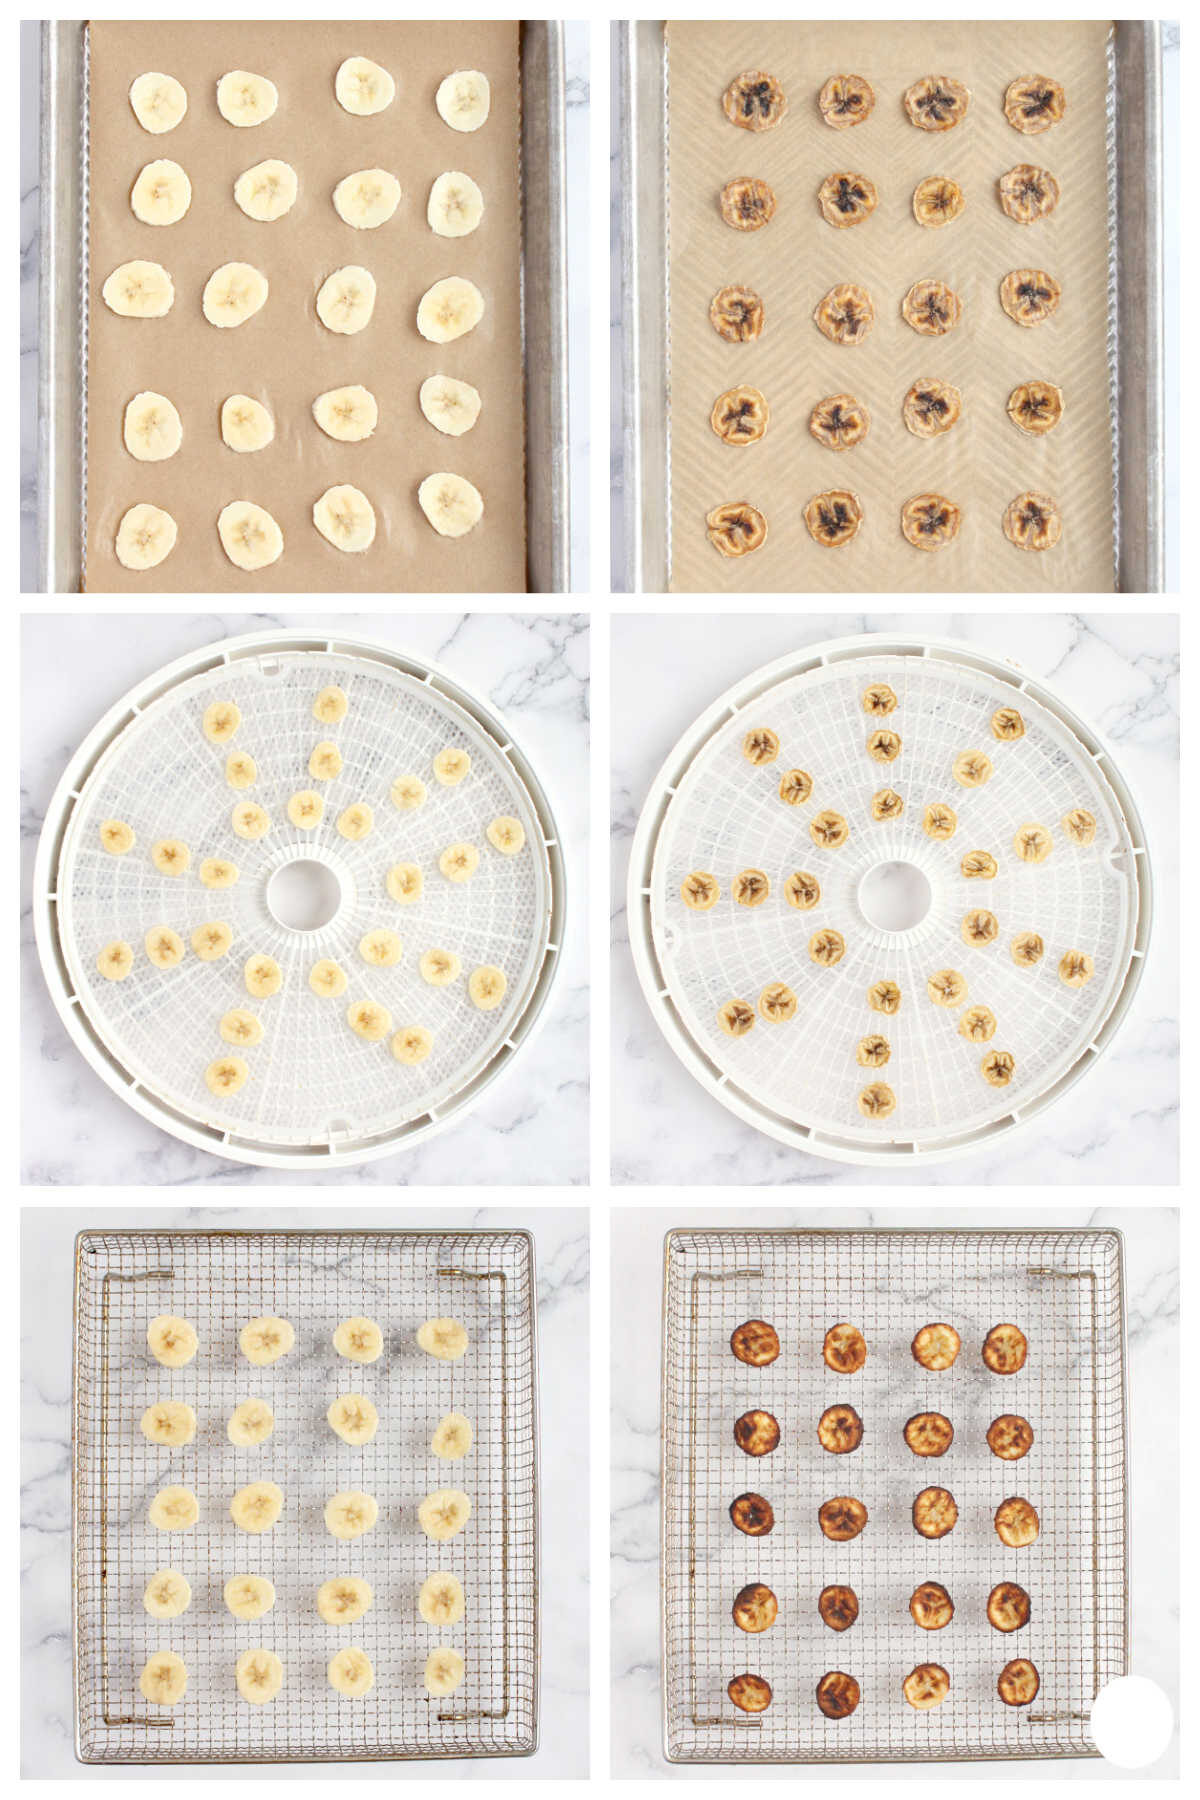 Three different methods for making homemade banana chips: the oven method, the dehydrator method, and the fryer method.  Photos of each method before and after cooking.